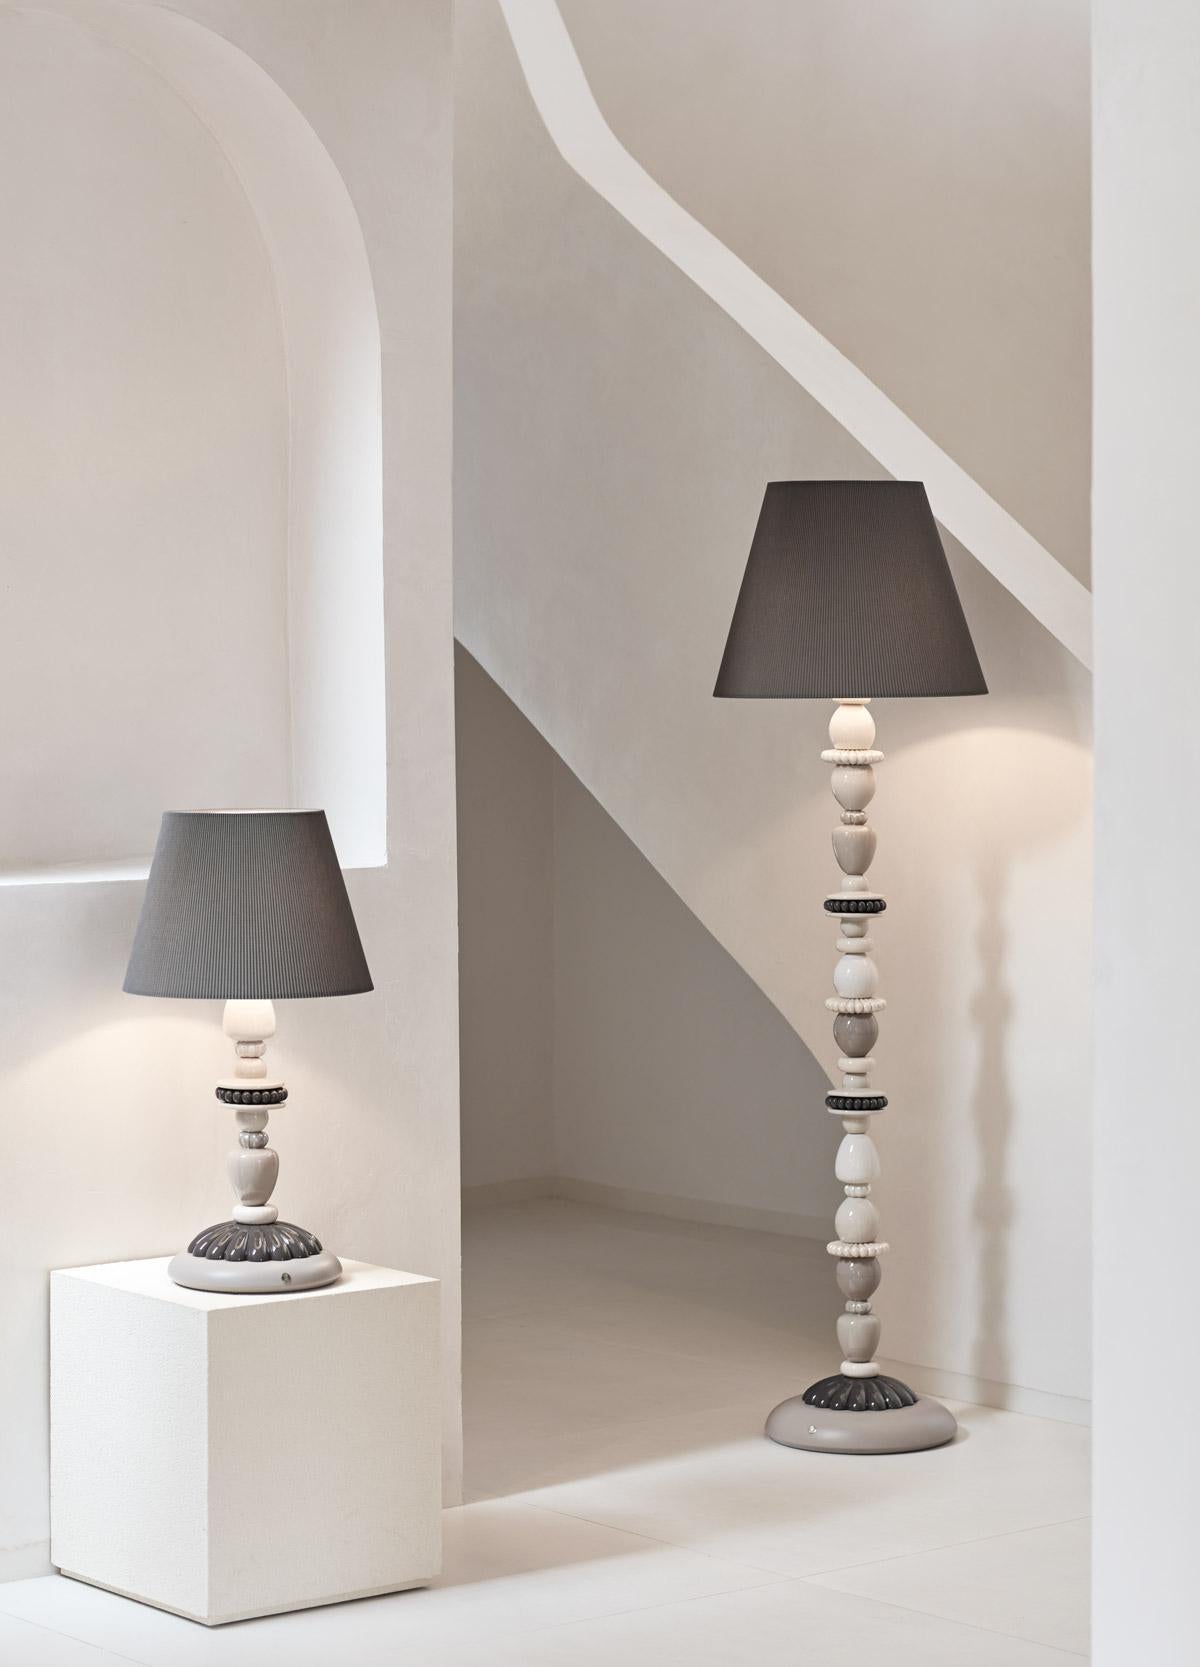 Floor lamp made in porcelain from the Firefly collection. Floor lamp from the Firefly collection, a series of original lighting designs with plant patterns. The lamp’s porcelain elements are decorated in shades of cream, beige and taupe with the